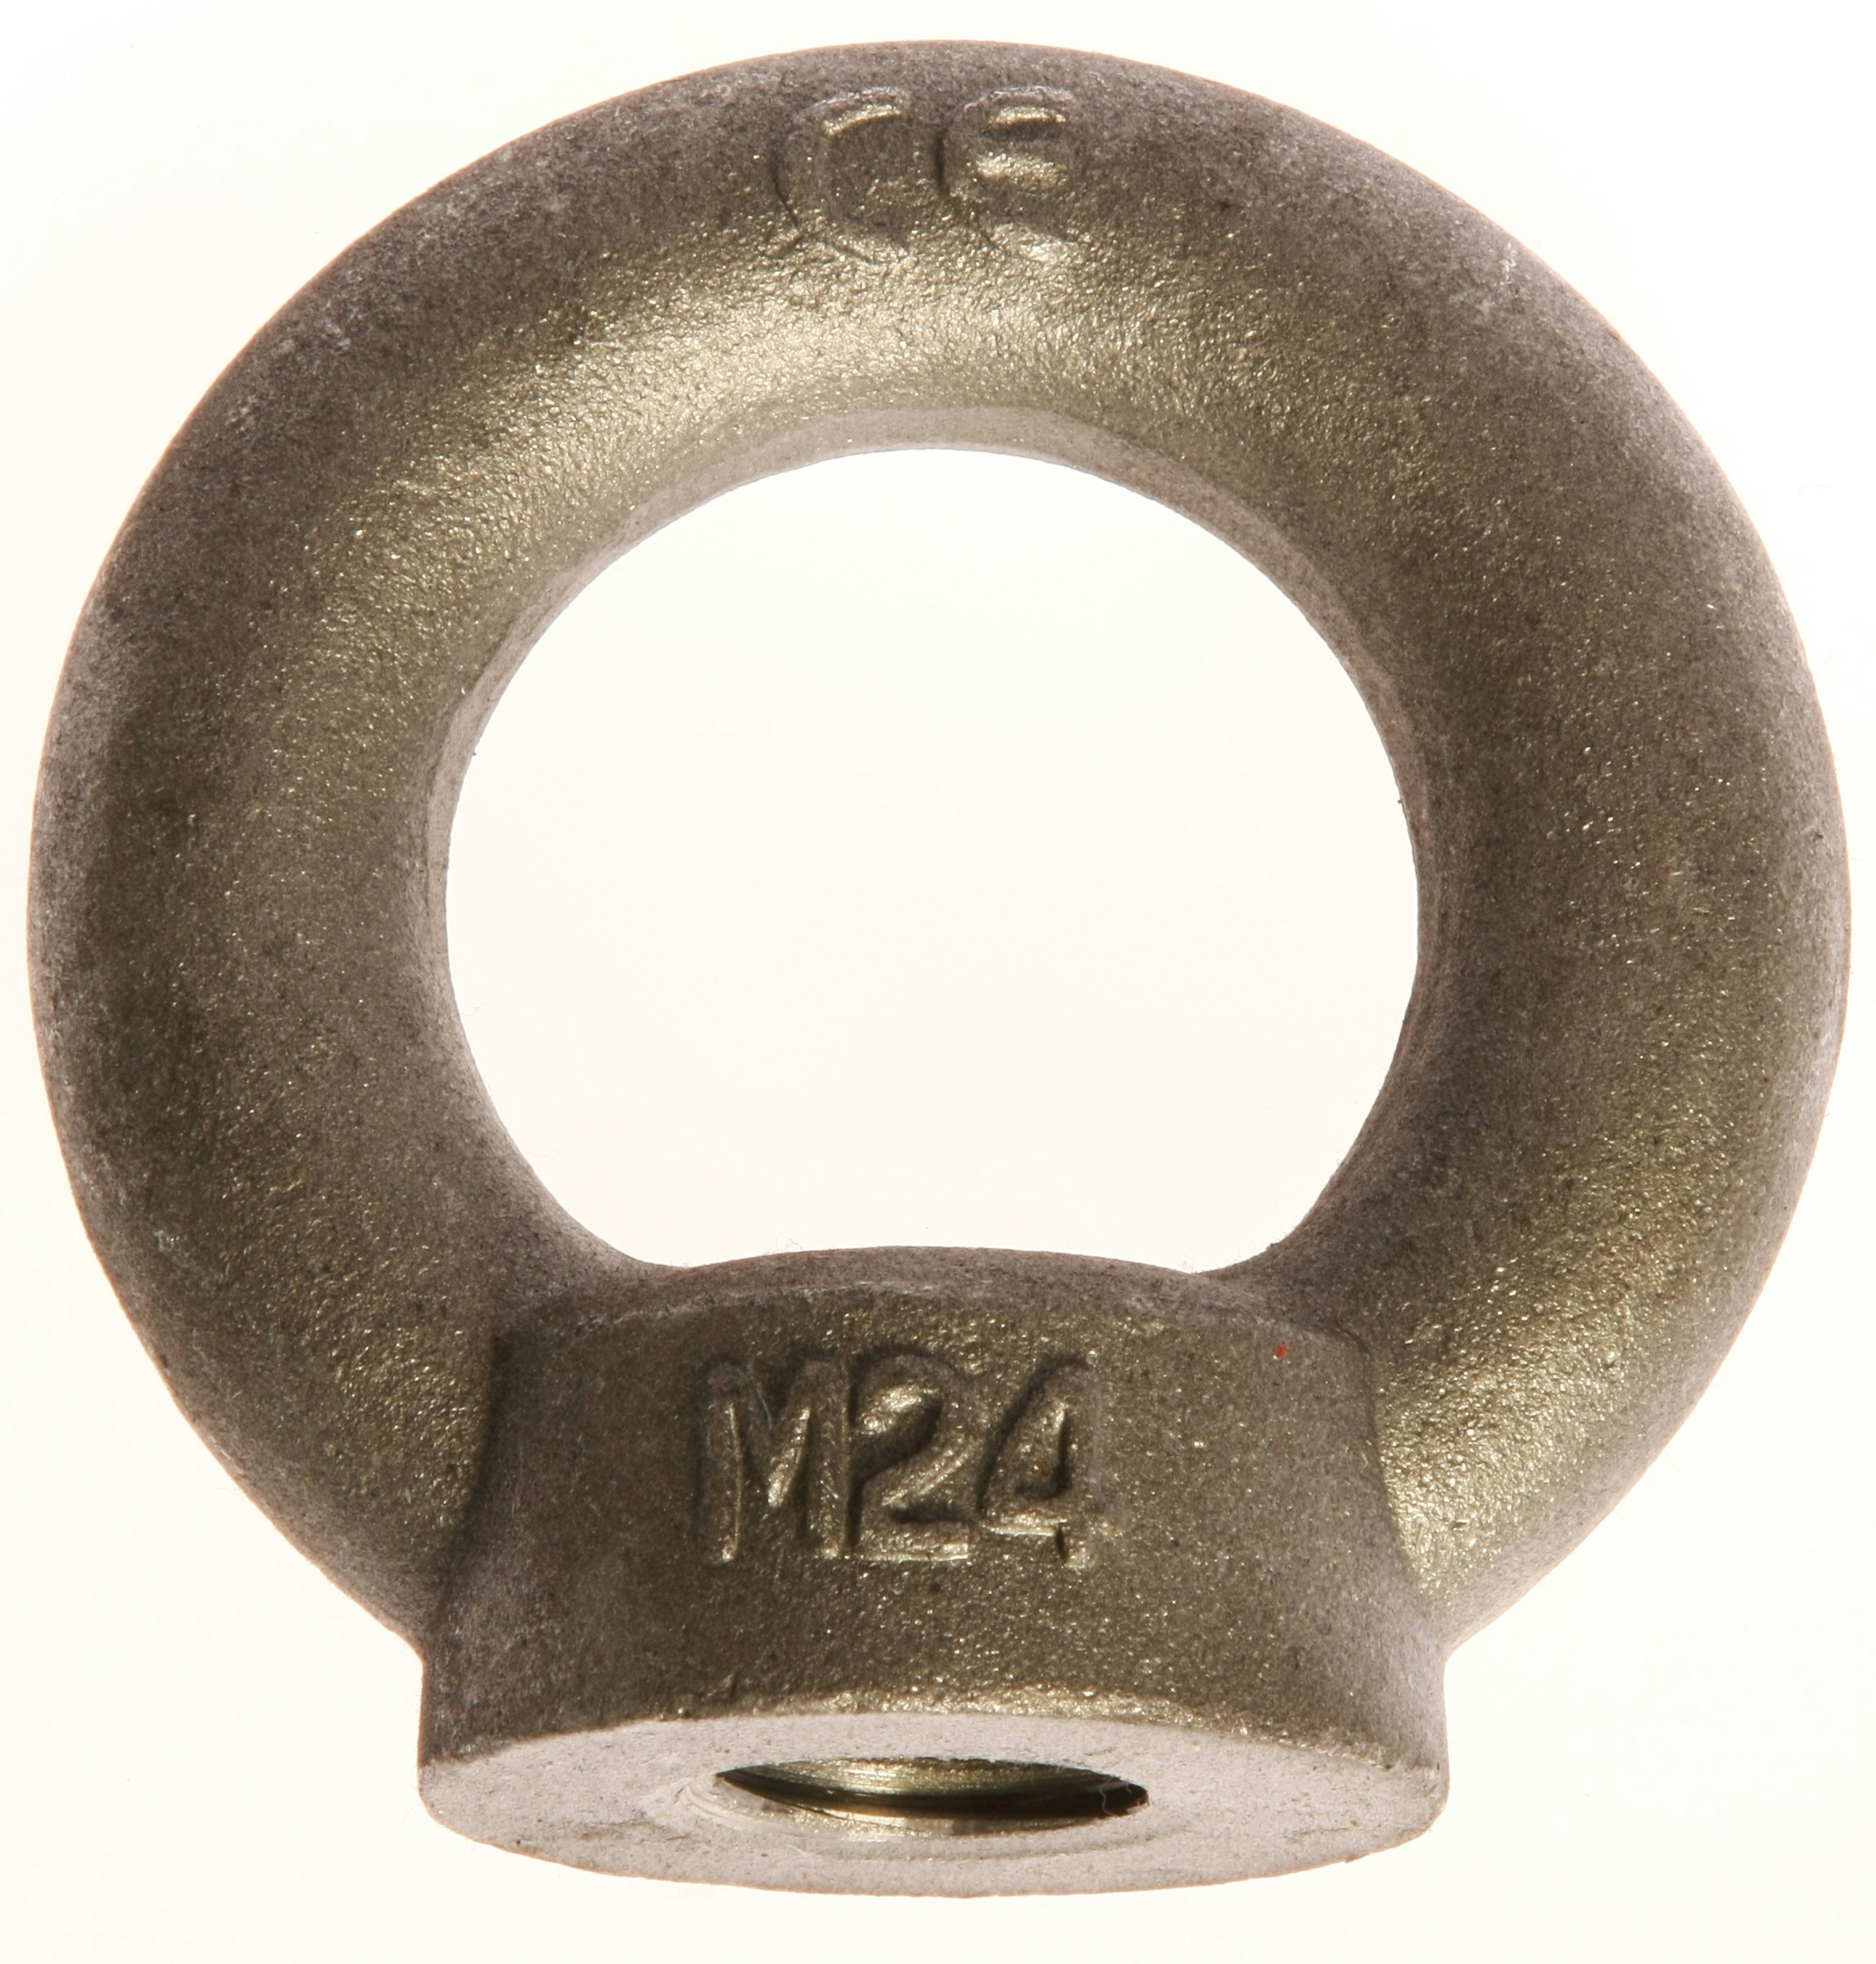 Image of our Van Beest DIN582 Eye Nut product